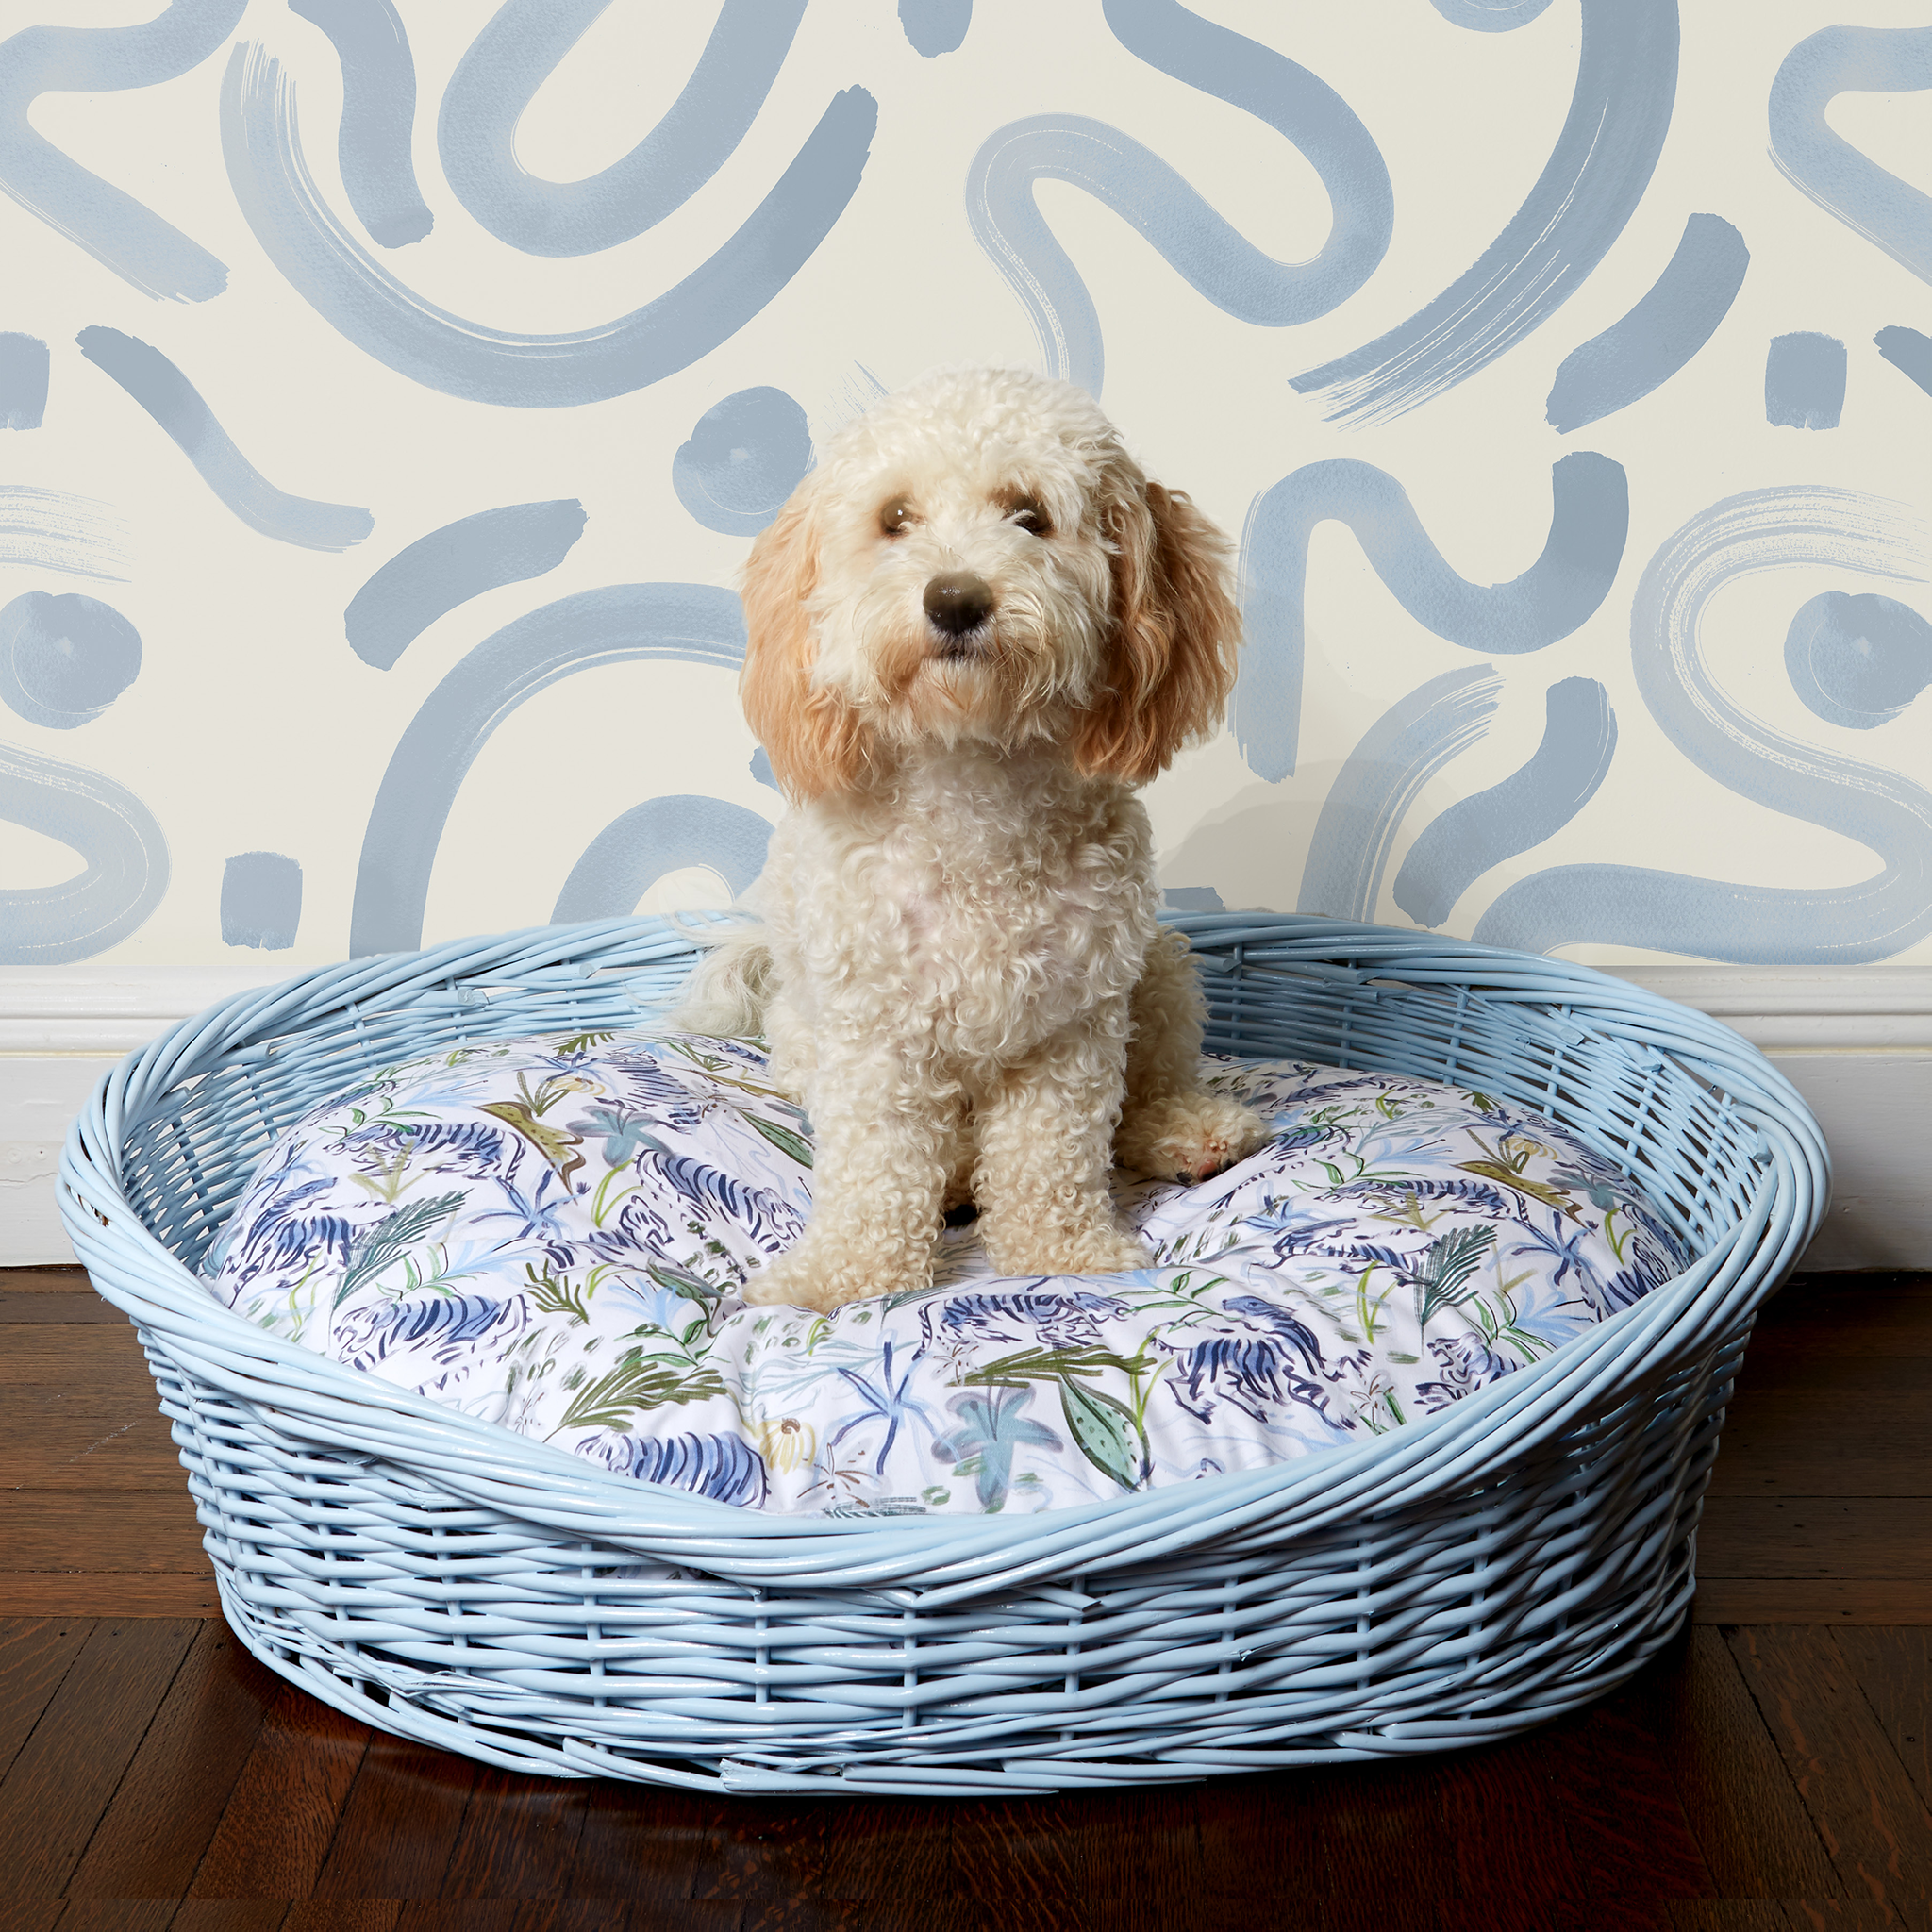 Close-up of dog on Blue With Intricate Tiger Design Printed Dog Bed in front of Sky Blue Printed Wallpaper